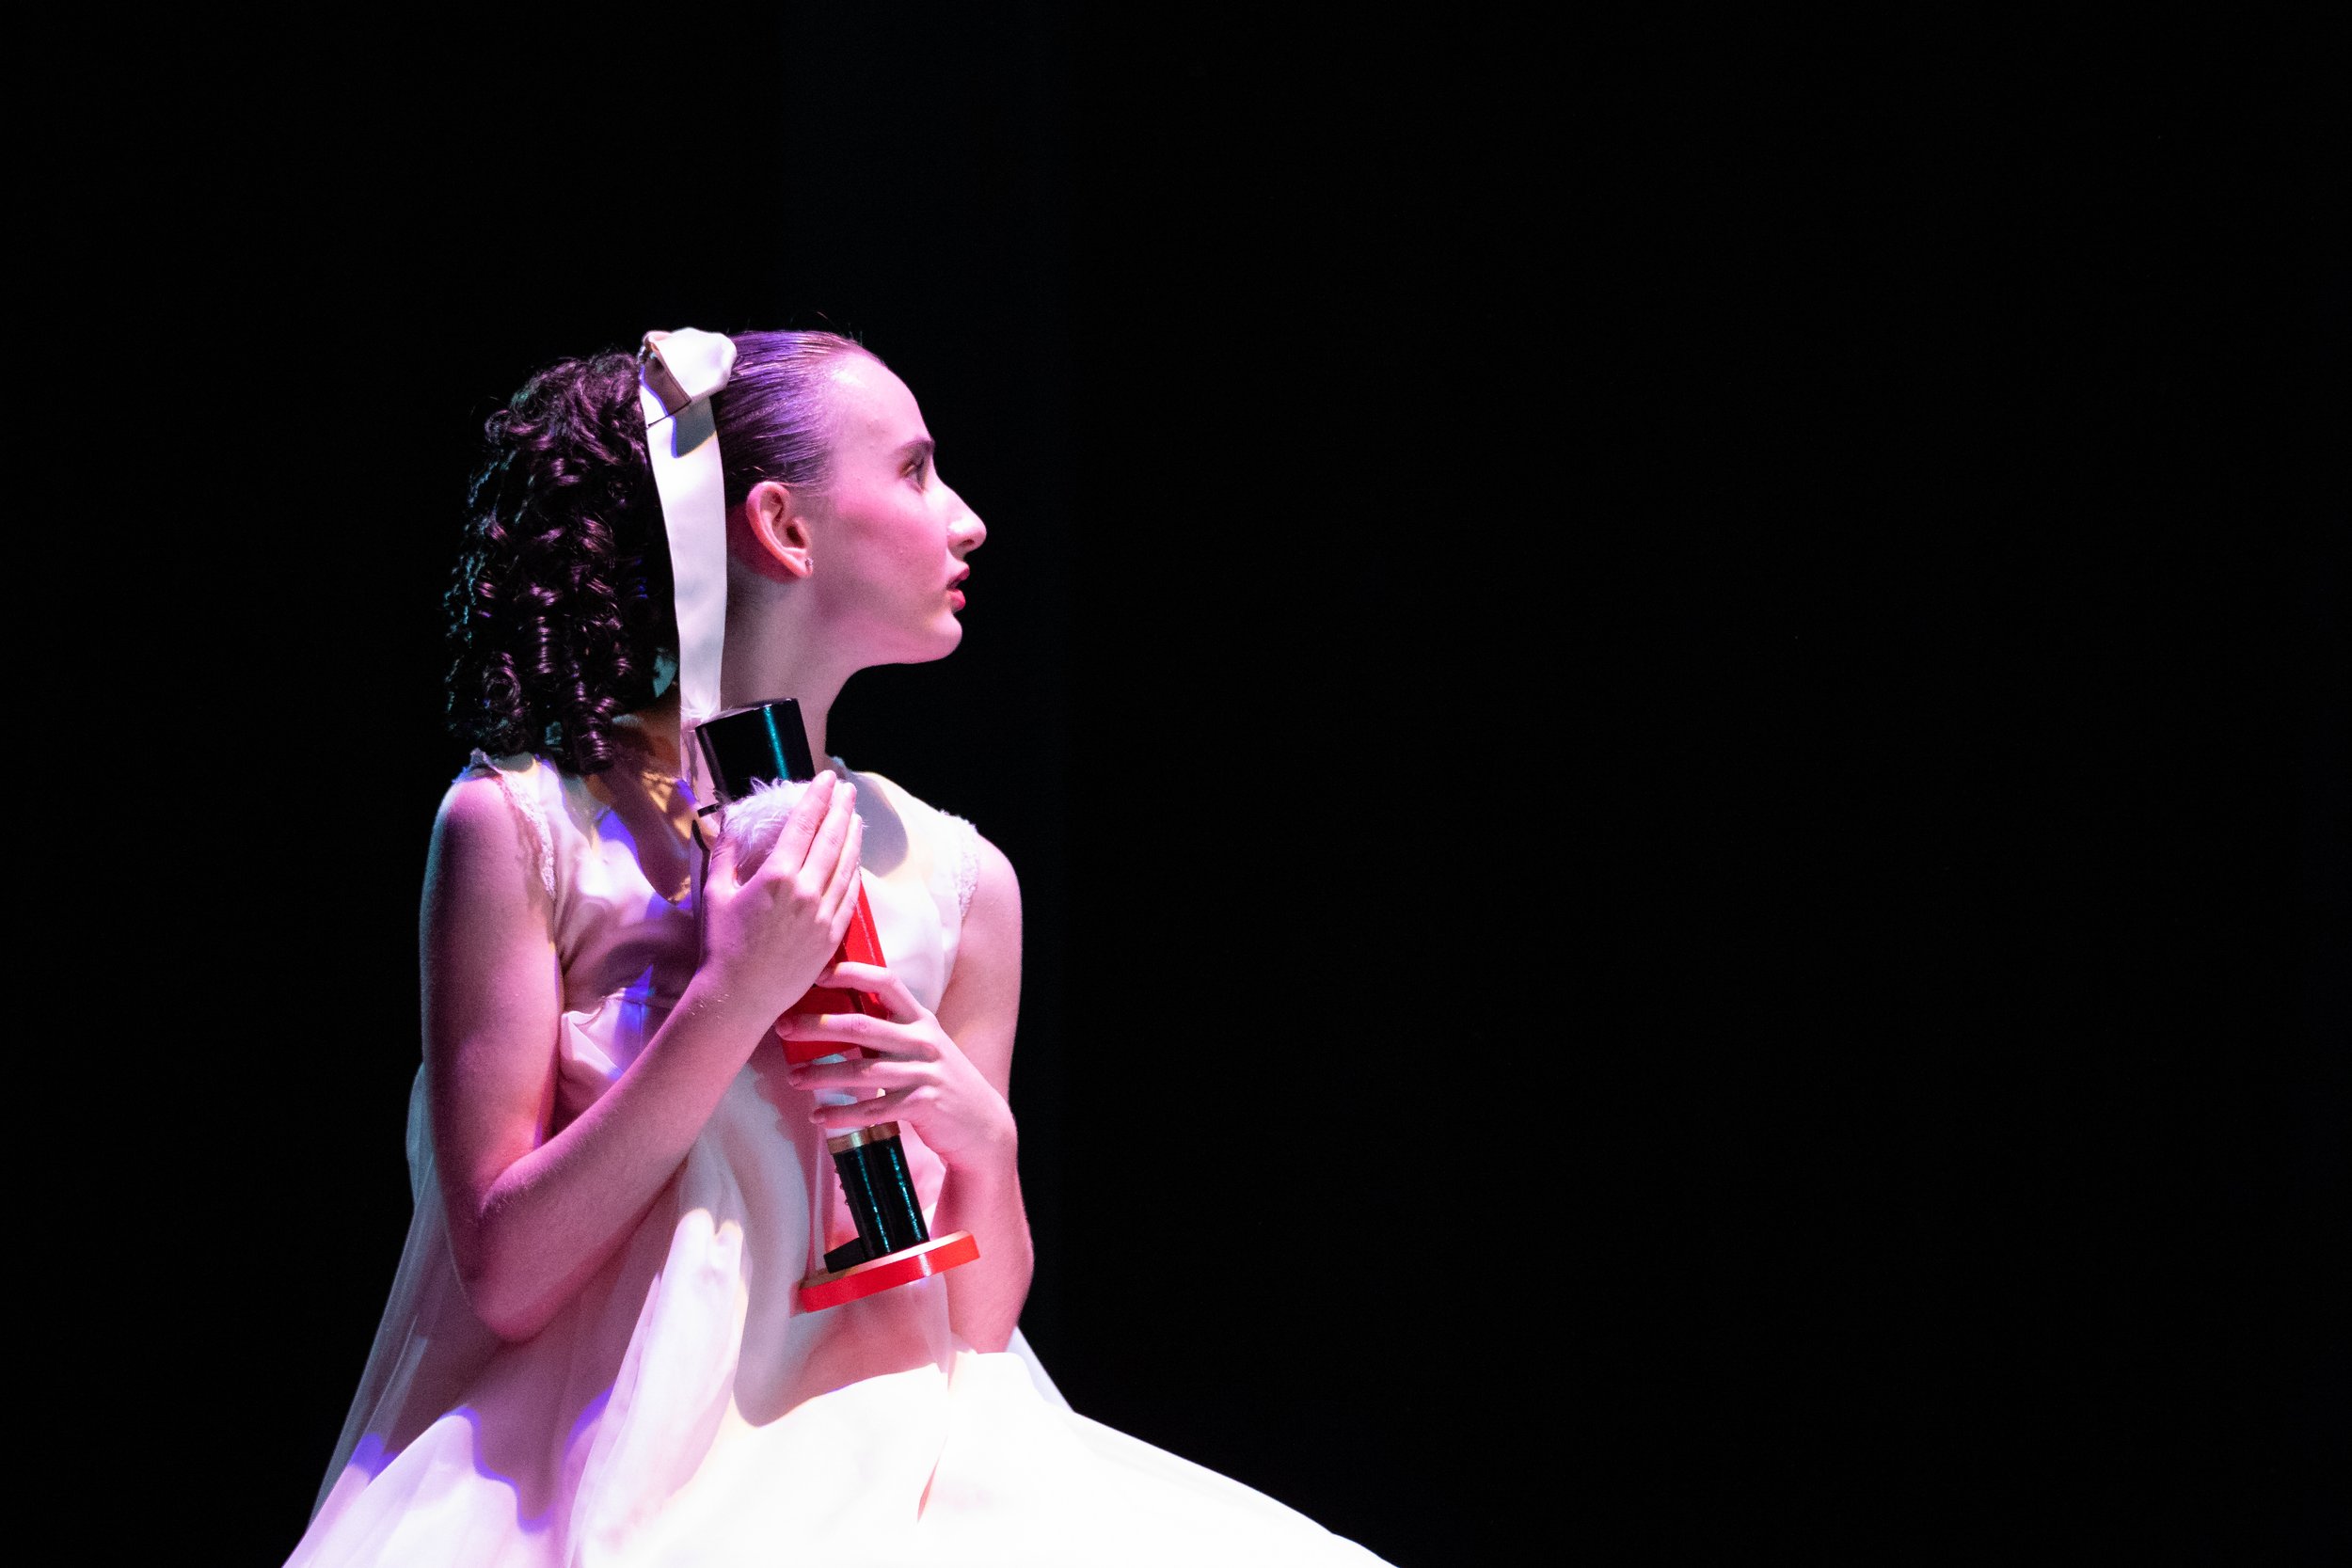  Clara, played by Sophie Wilson, clutching her toy nutcracker after it went missing after the party during the first act, second scene of The Nutcracker  performed by Westside Ballet of Santa Monica at the The Broad Stage in Santa Monica, Calif. on S